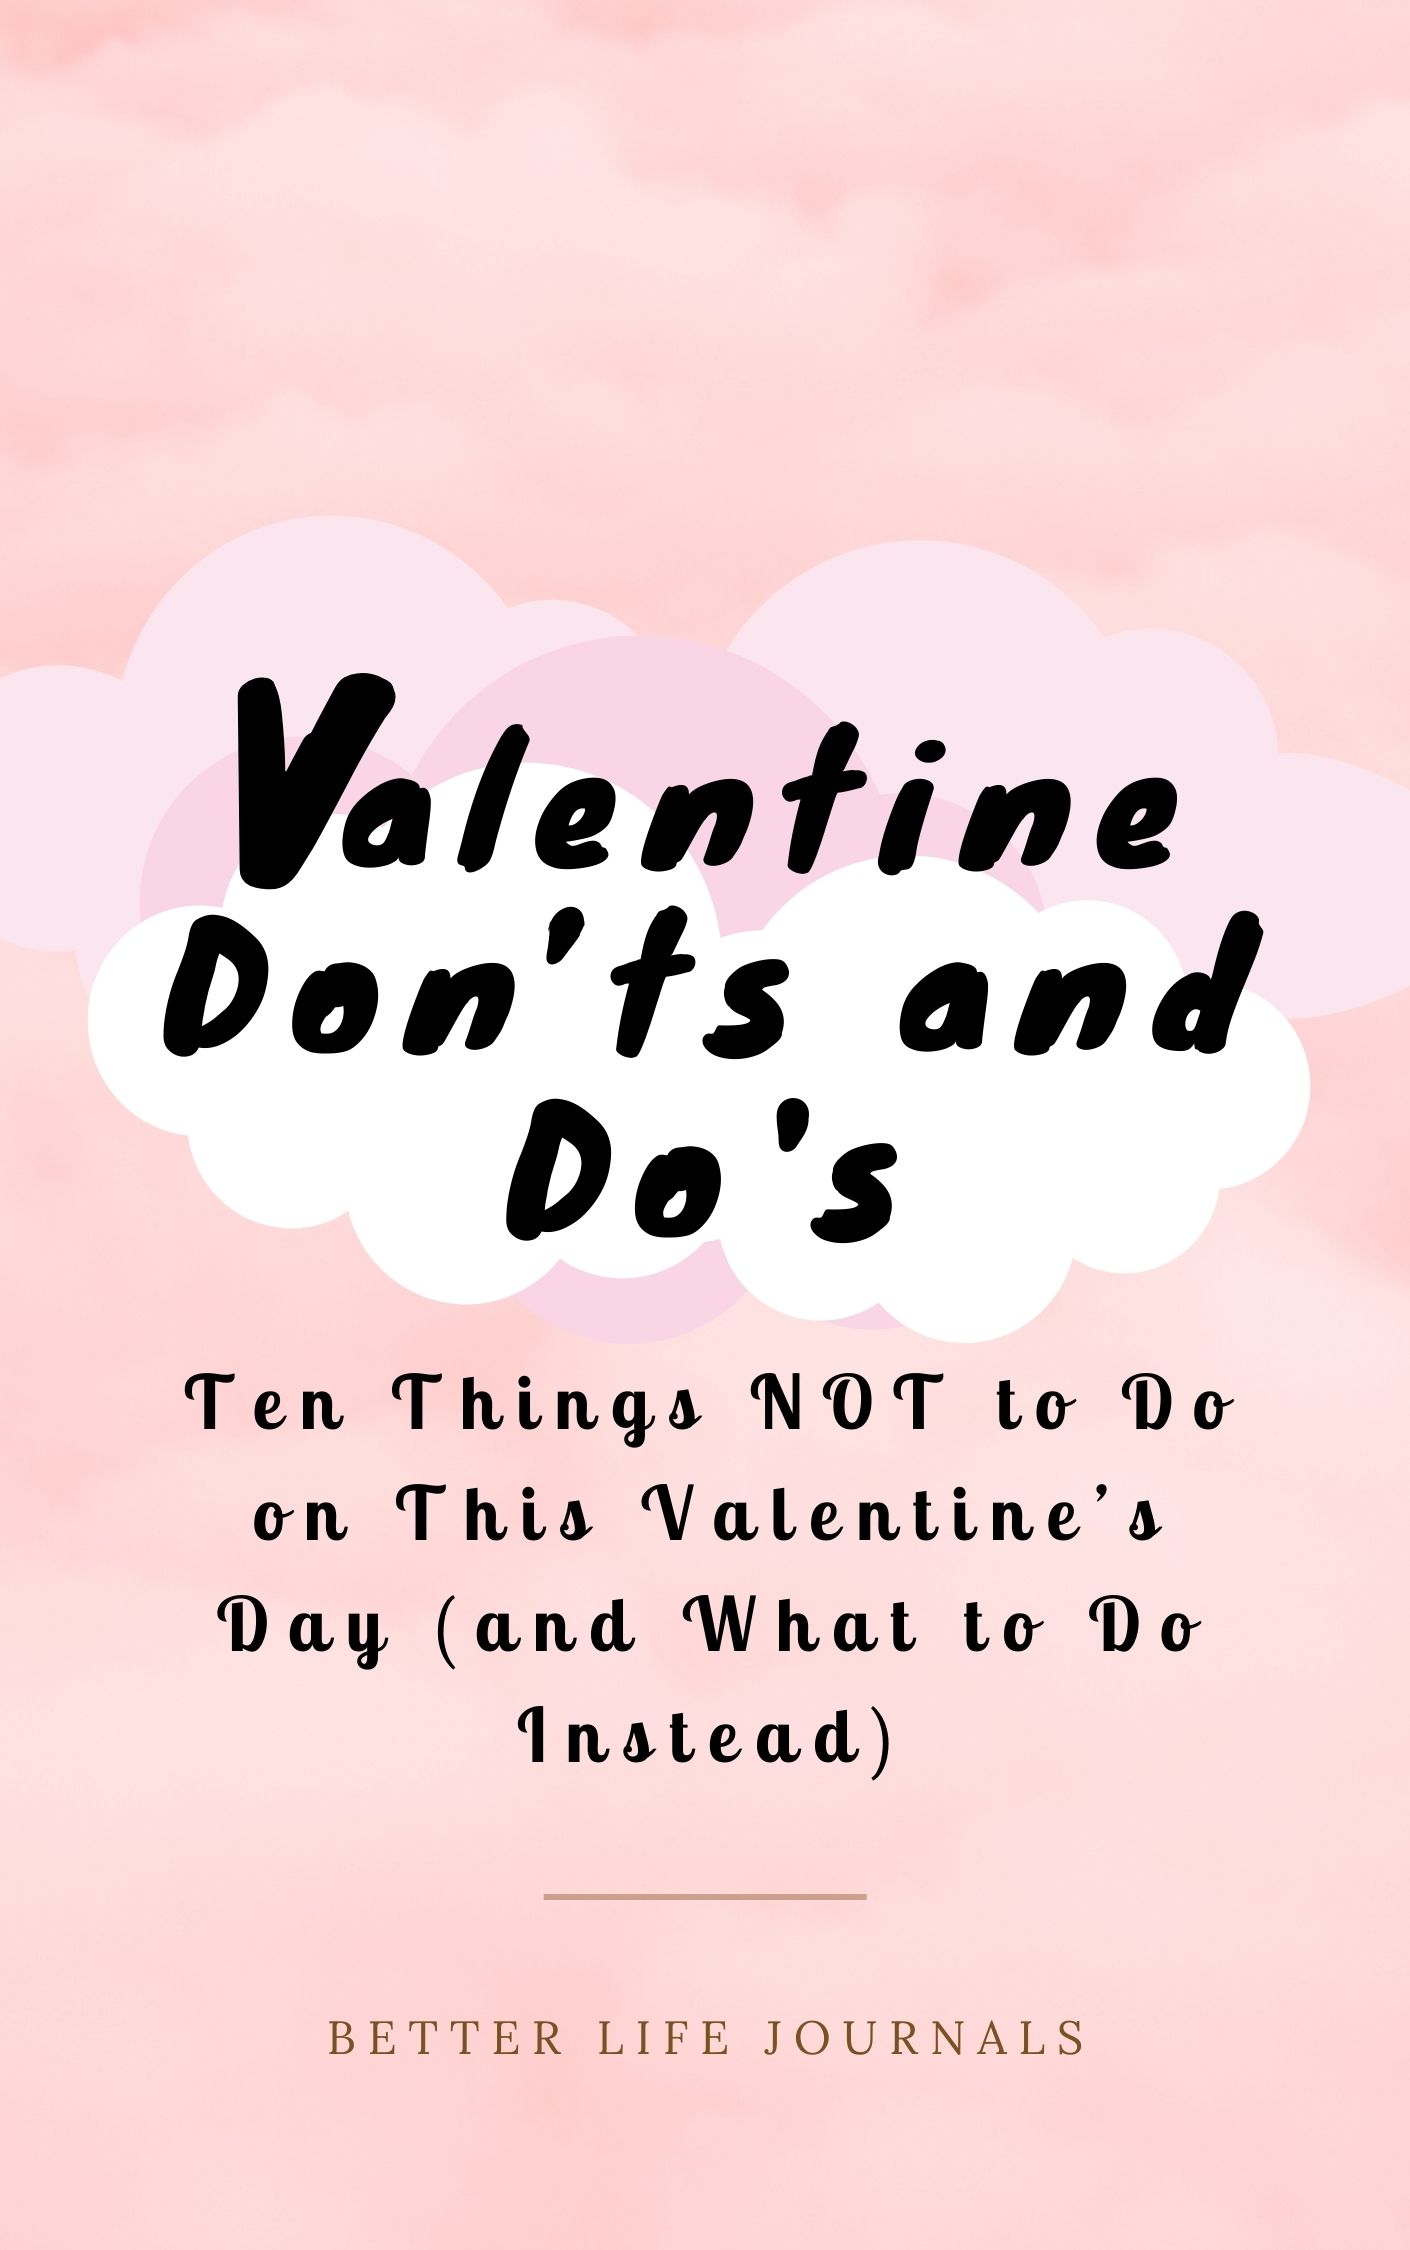 FREE: Valentine Don’ts and Do’s: Ten Things NOT to Do on This Valentine’s Day (and What to Do Instead) by Better Life Journals